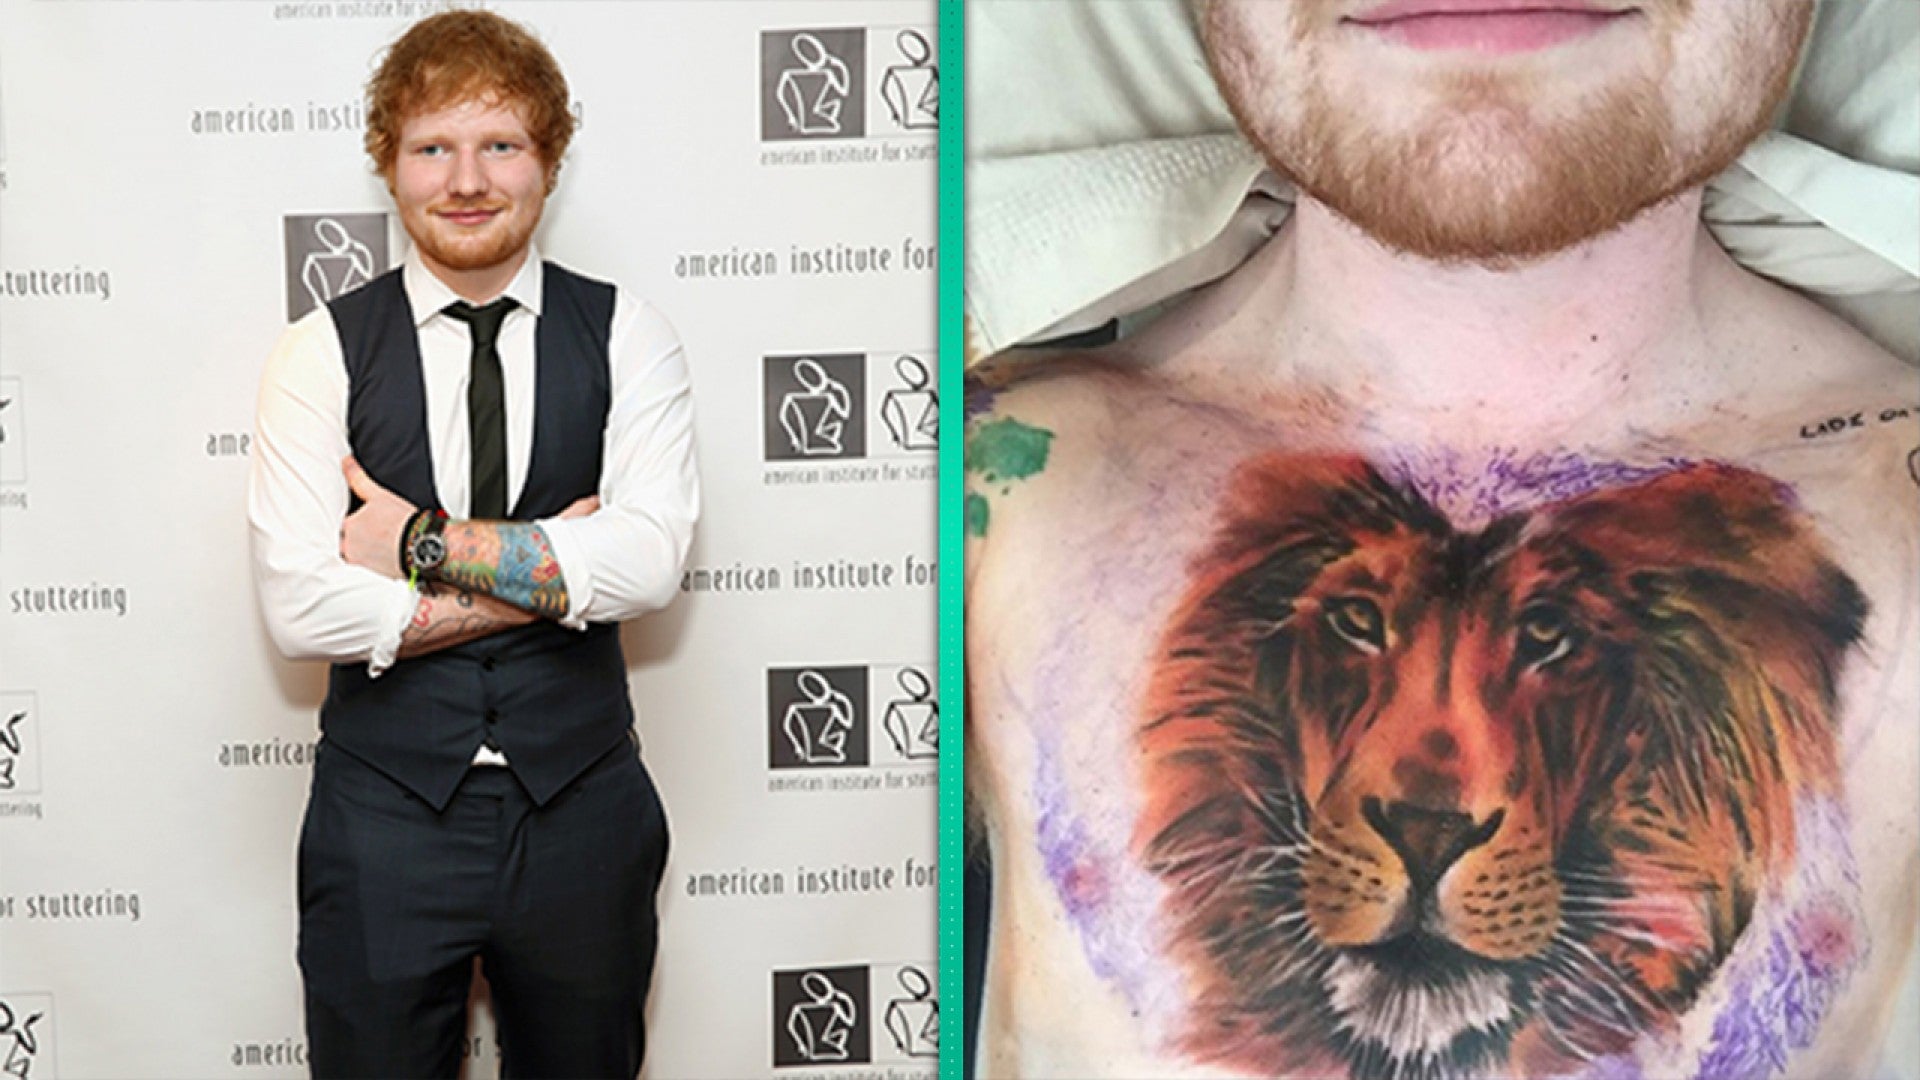 Heinz replicates Ed Sheeran's ketchup tattoo on limited edition bottles |  The Drum